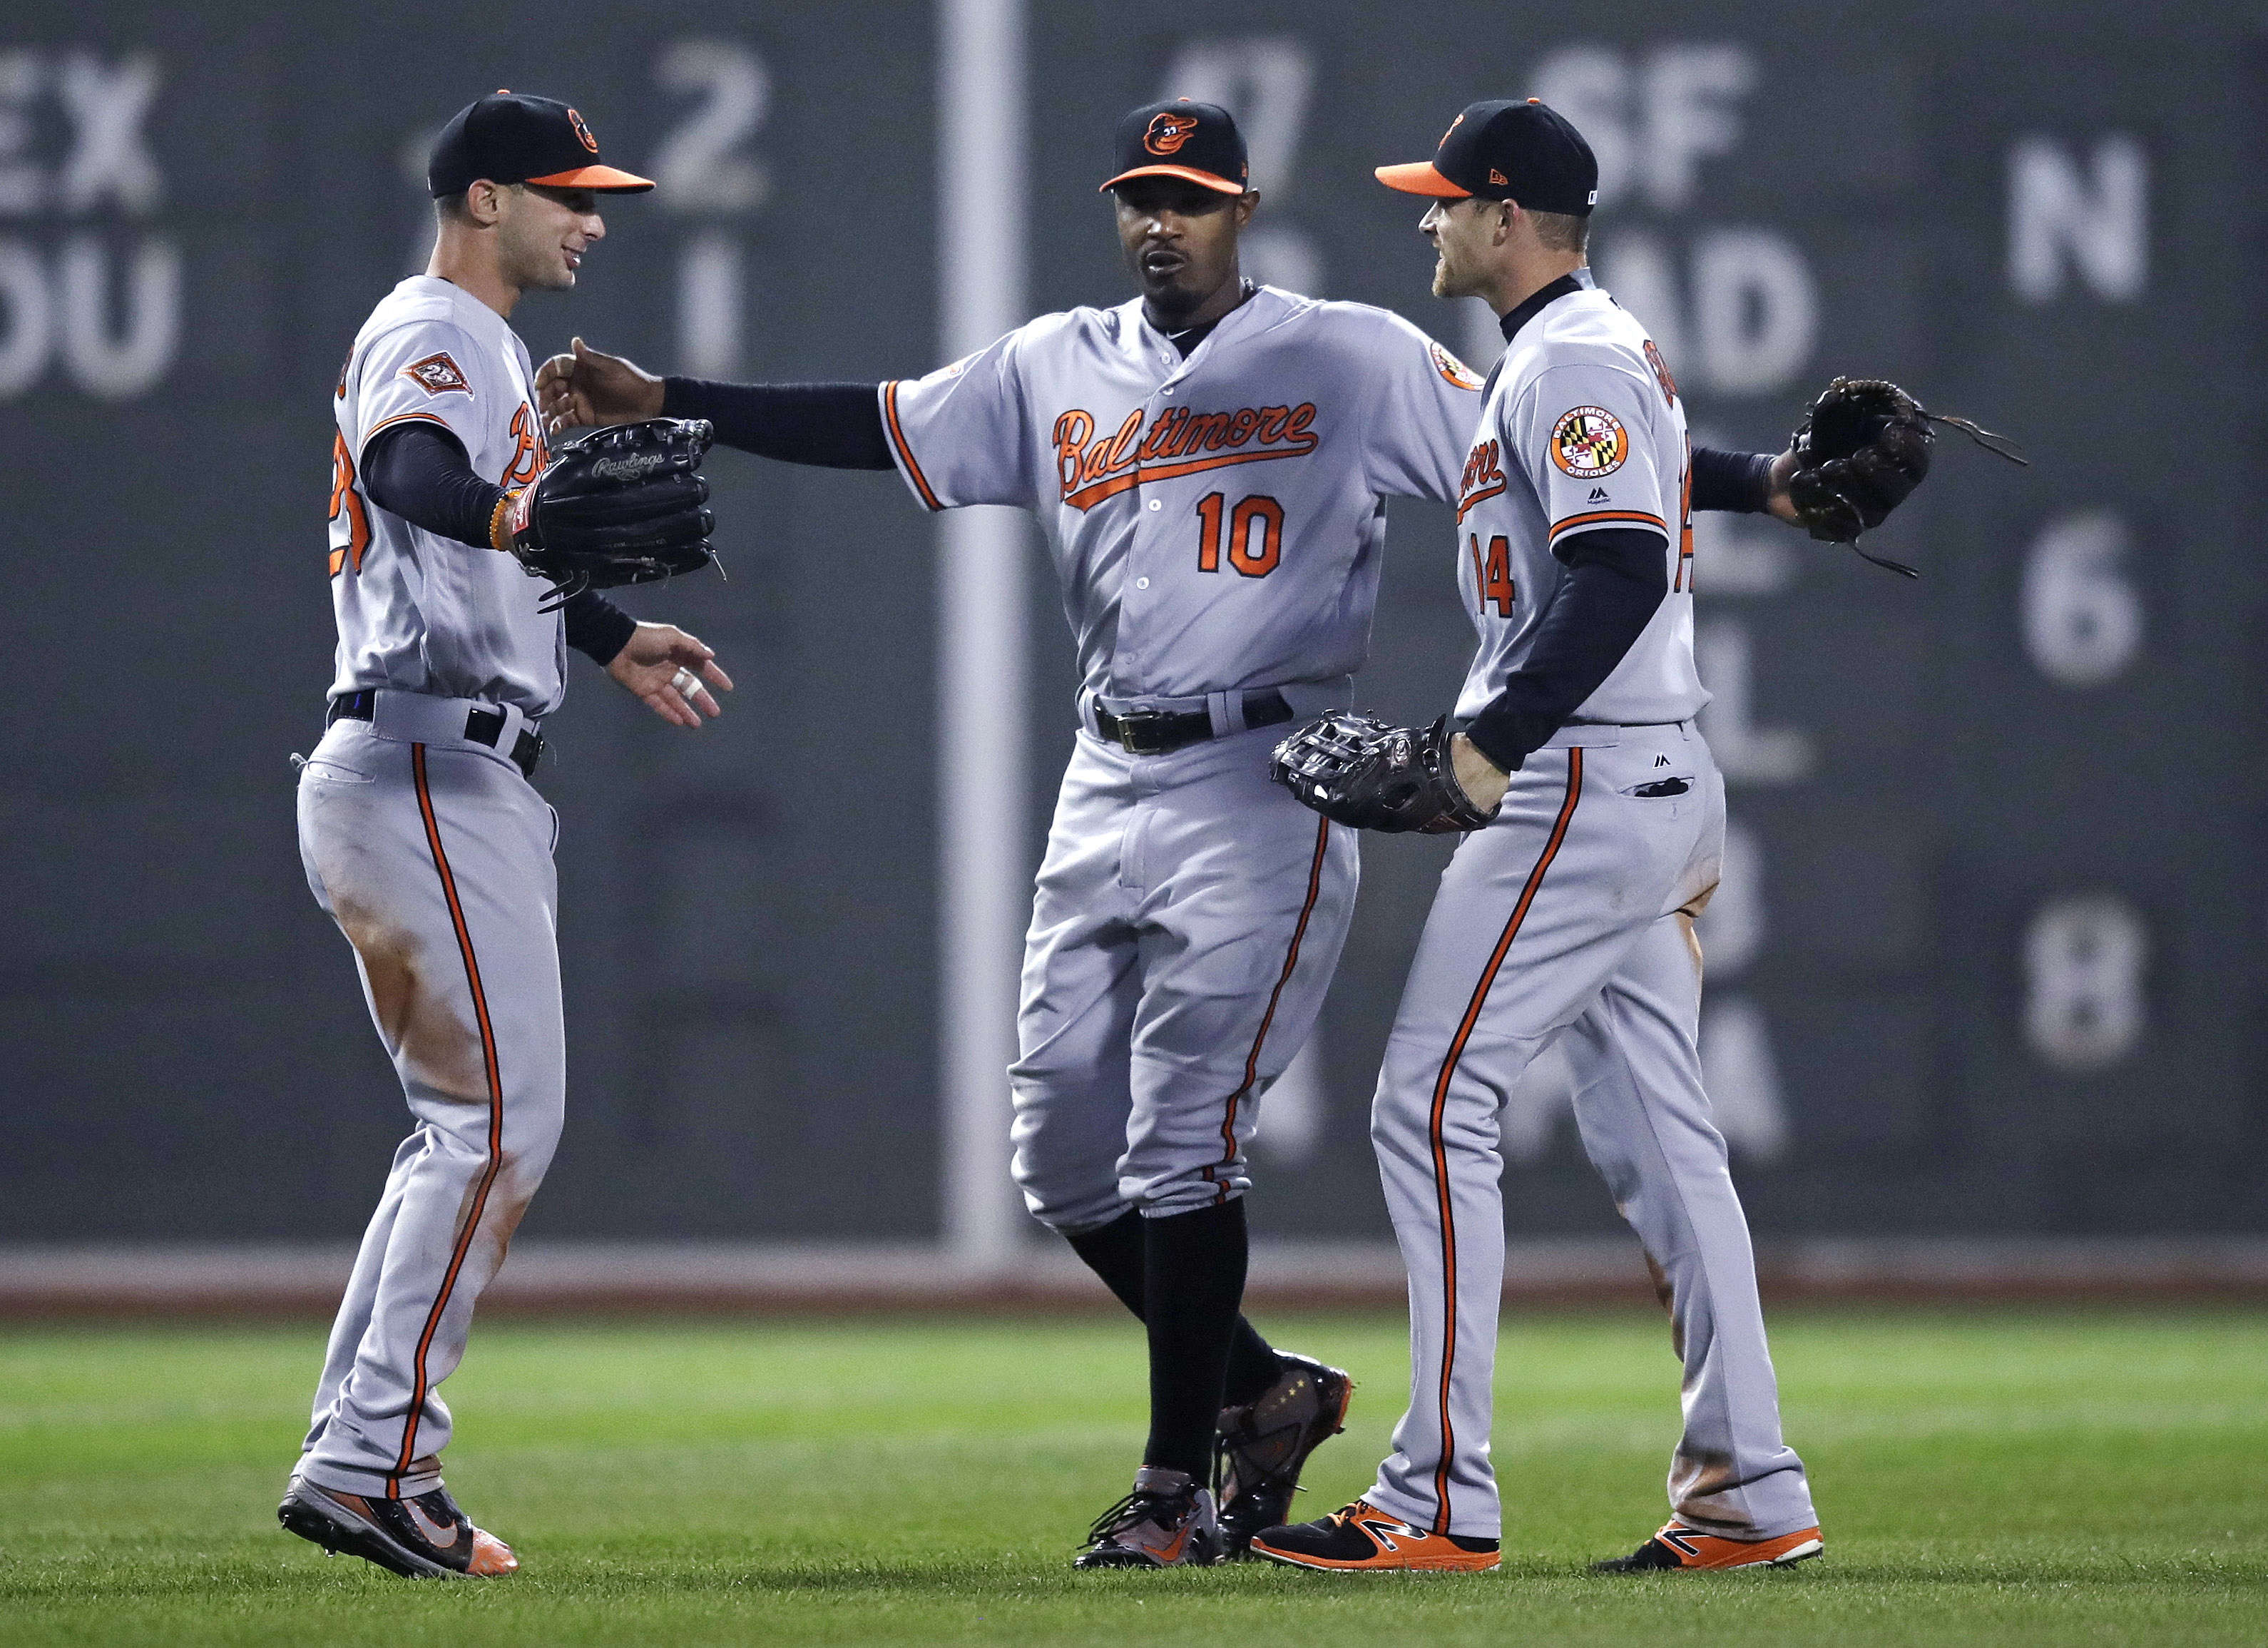 Baltimore Orioles center fielder Adam Jones (10) celebrates with right fielder Craig Gentry, right, and left fielder Joey Rickard left, after defeating the Boston Red Sox 5-2 during a baseball game at Fenway Park in Boston, Monday, May 1, 2017. (AP Photo/Charles Krupa)